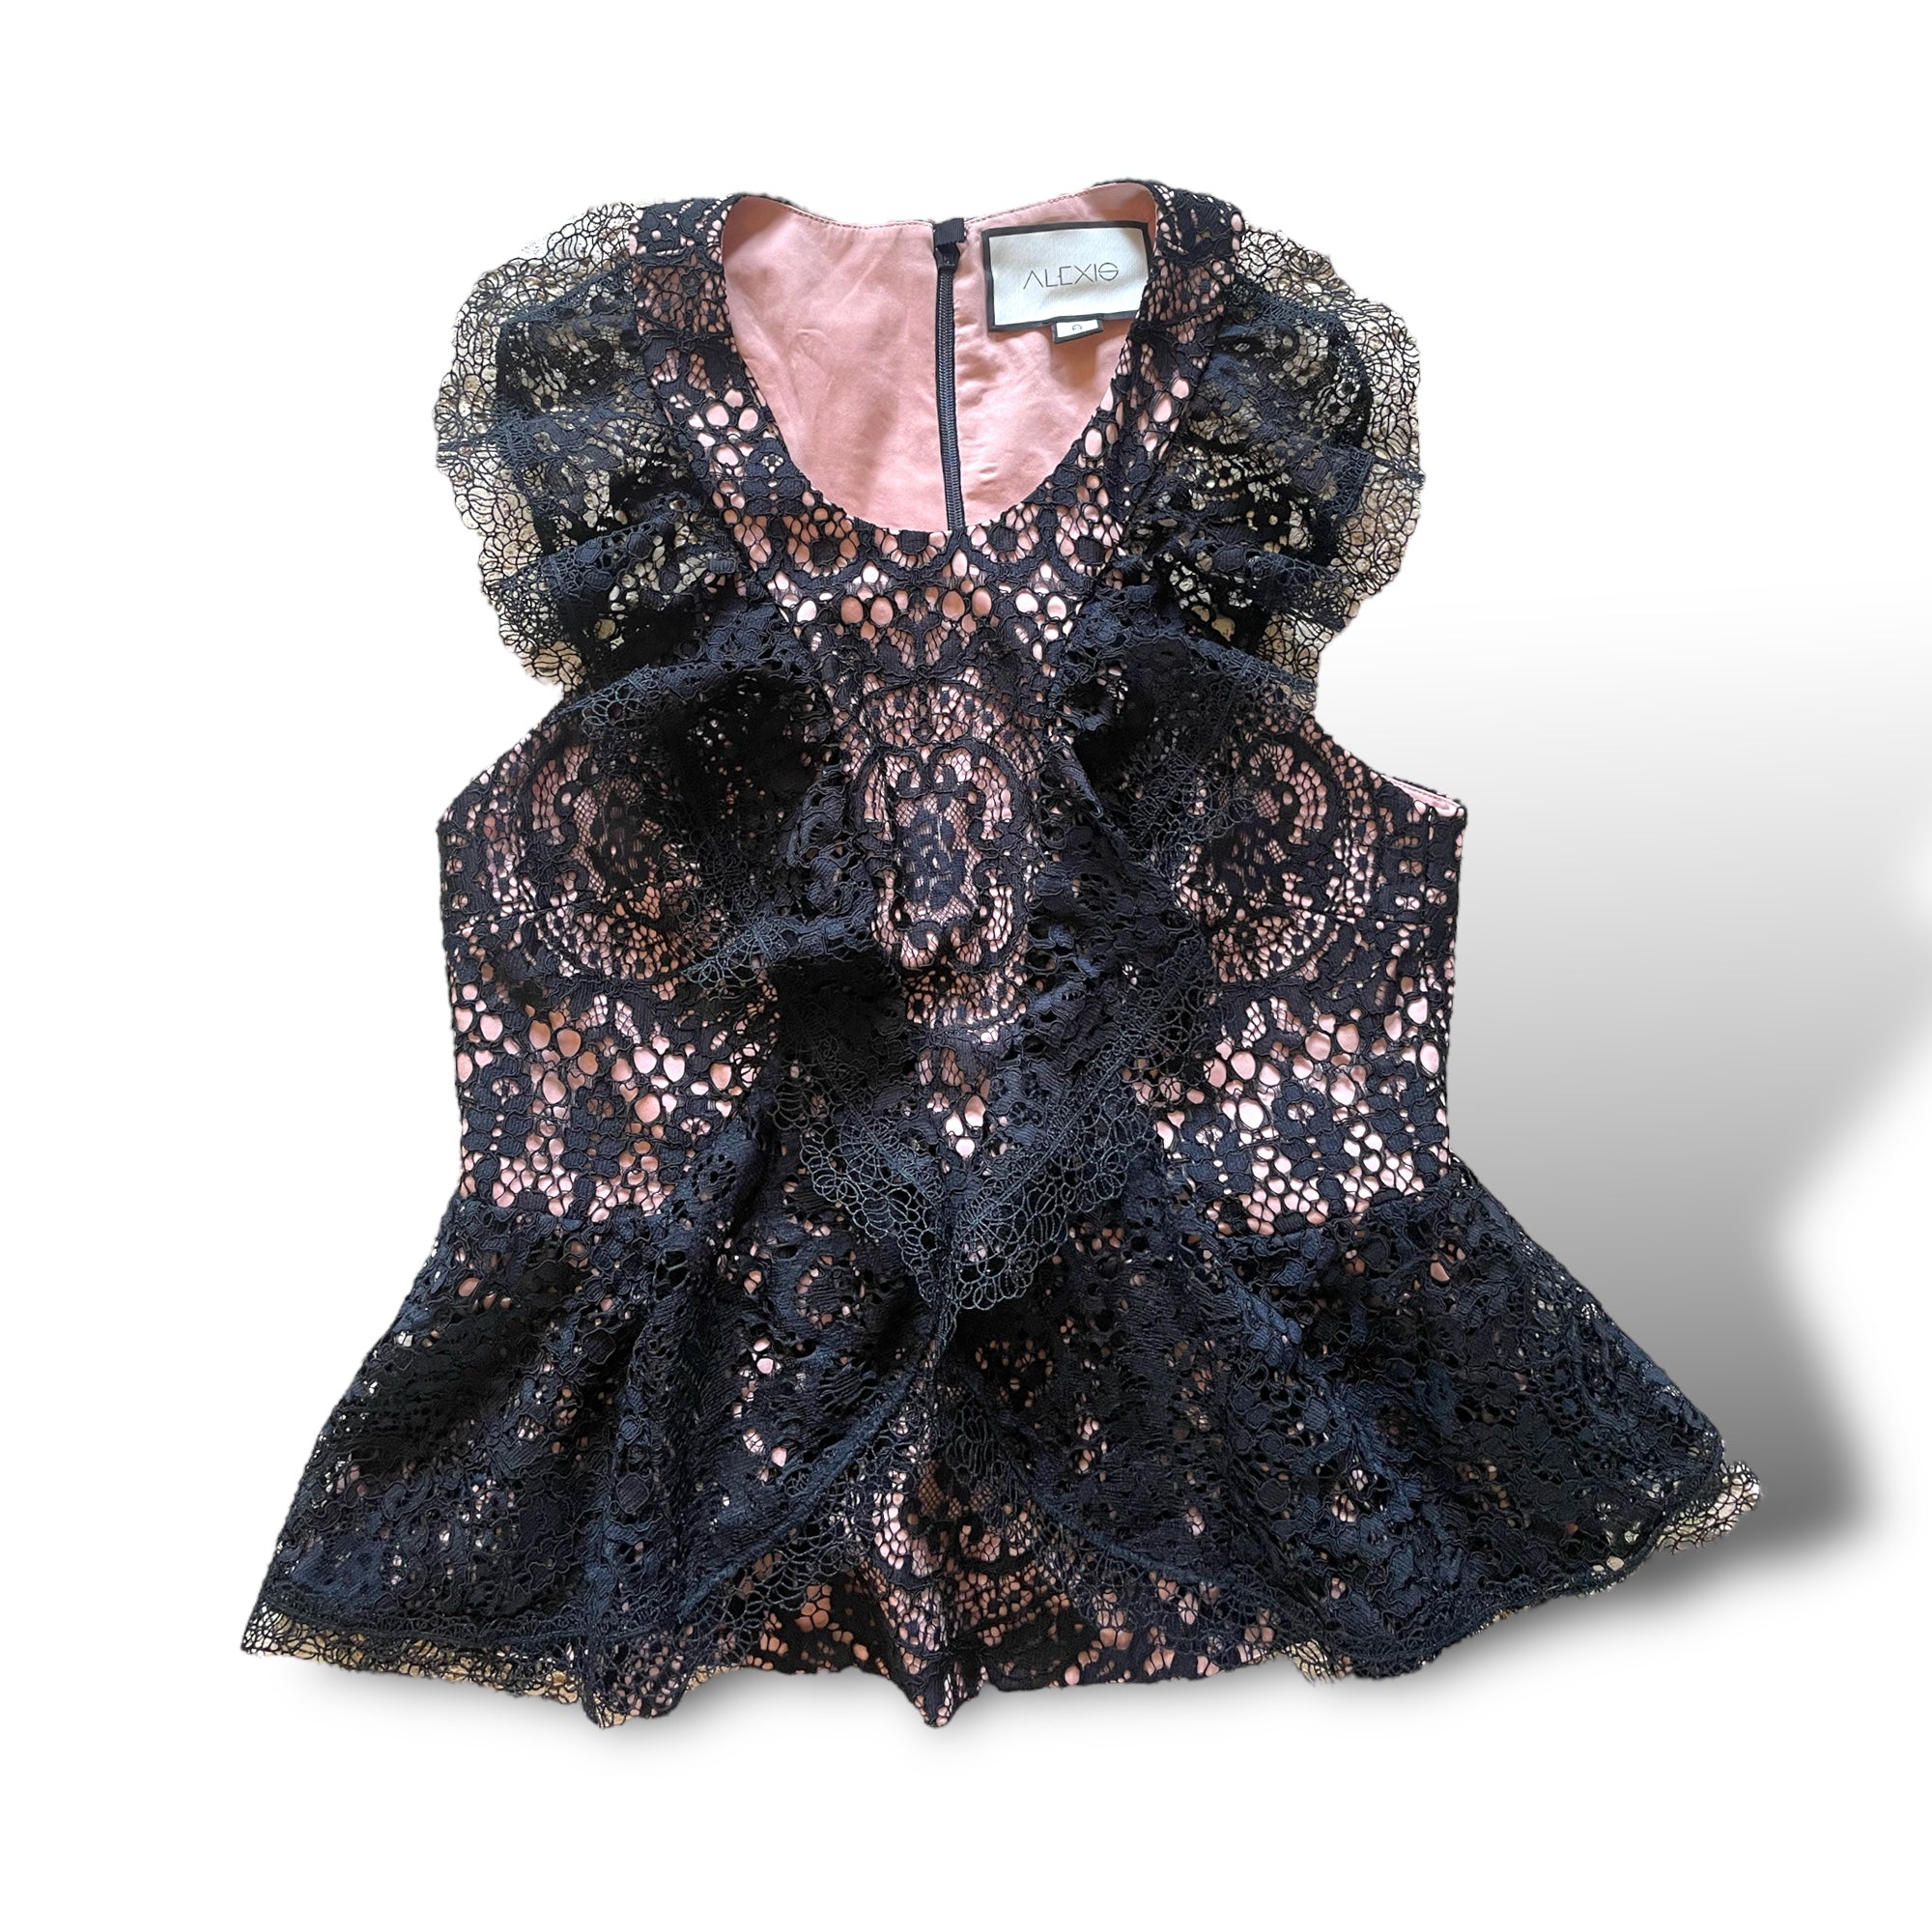 ALEXIS Ruffled Black & Mauve Lace Top |Size: Small|